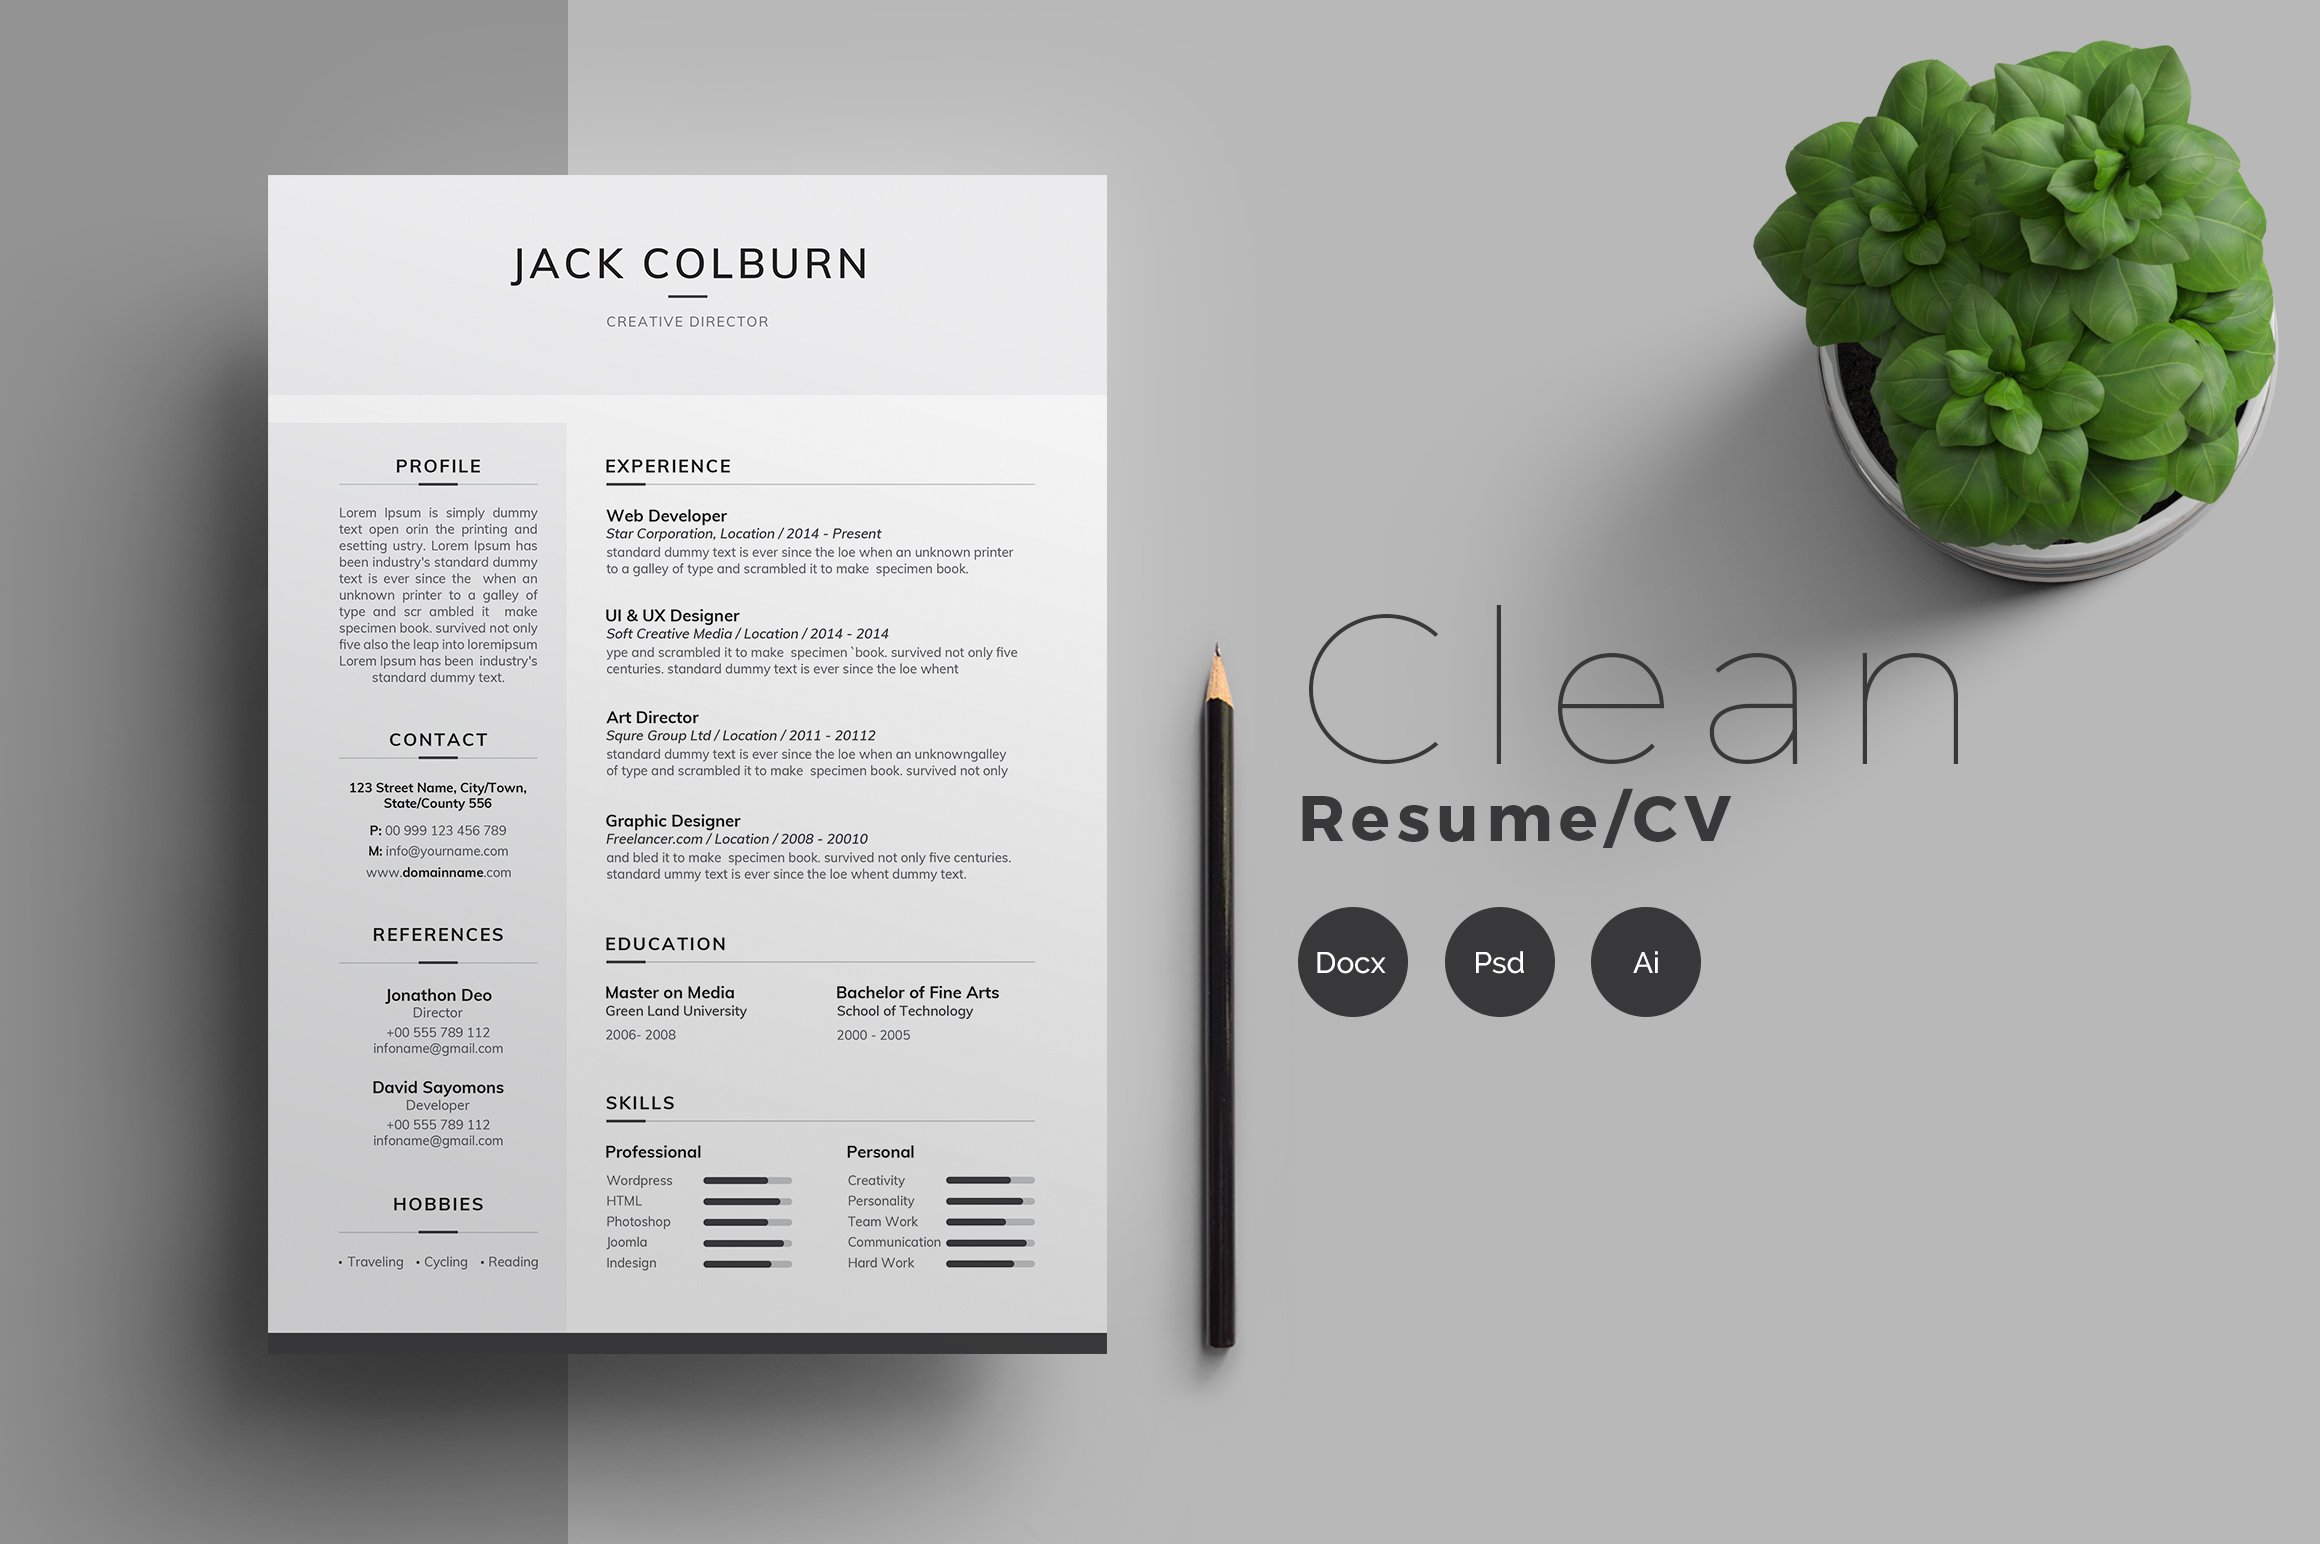 Resume/CV - Clean cover image.